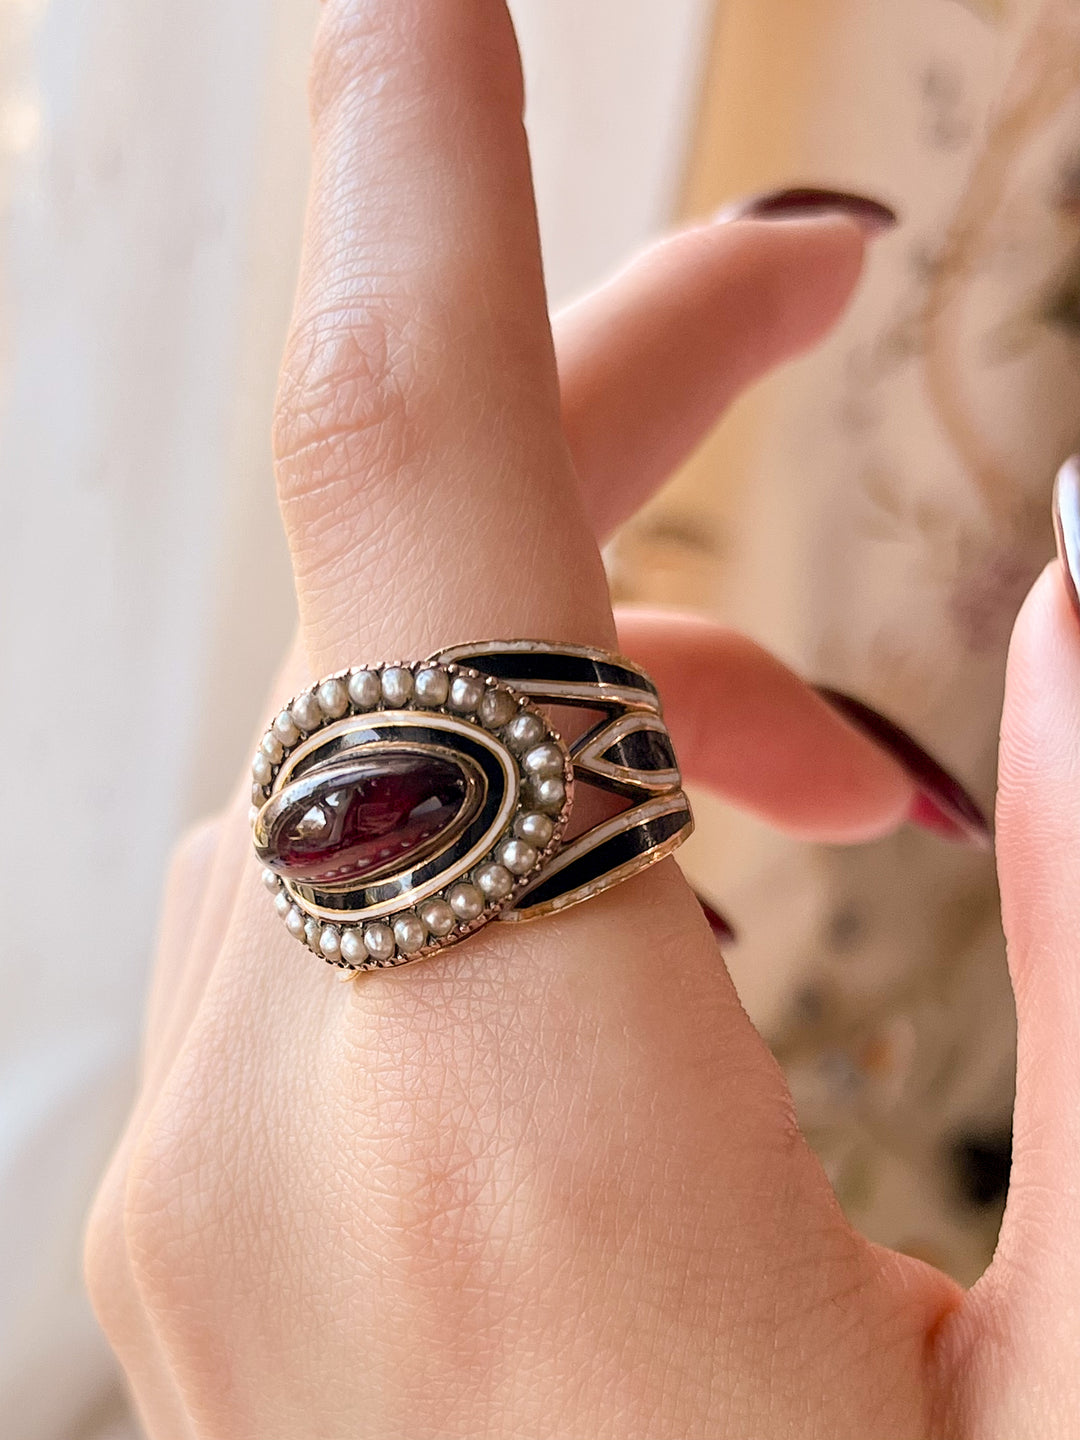 Outstanding Black and White Enamel Memorial Ring with Garnet Cabochon